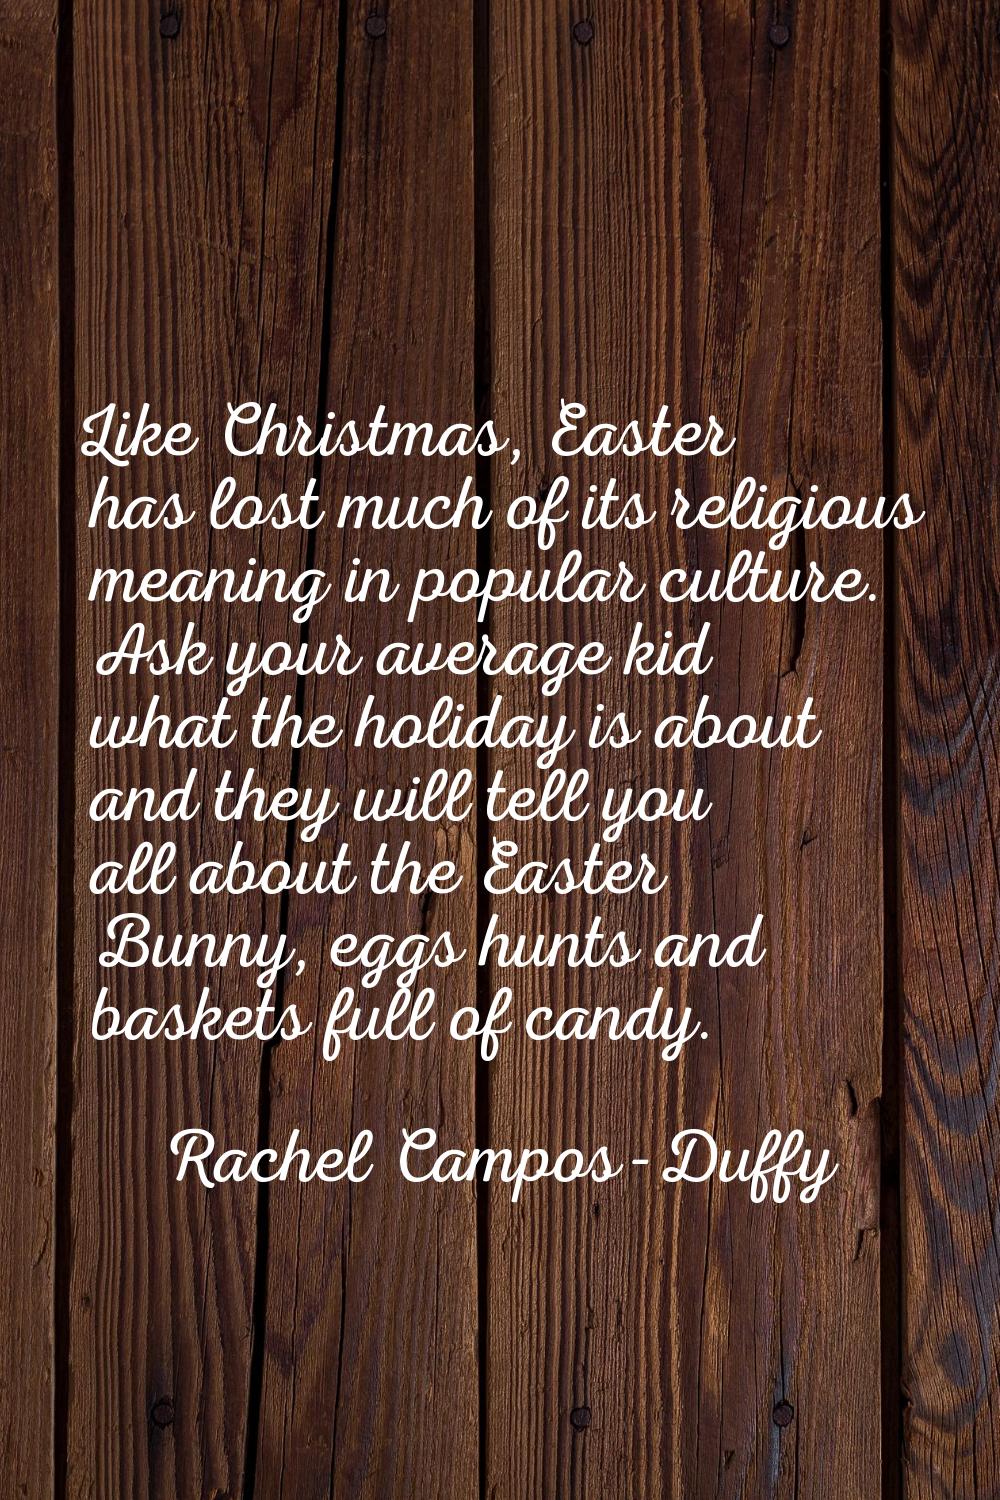 Like Christmas, Easter has lost much of its religious meaning in popular culture. Ask your average 